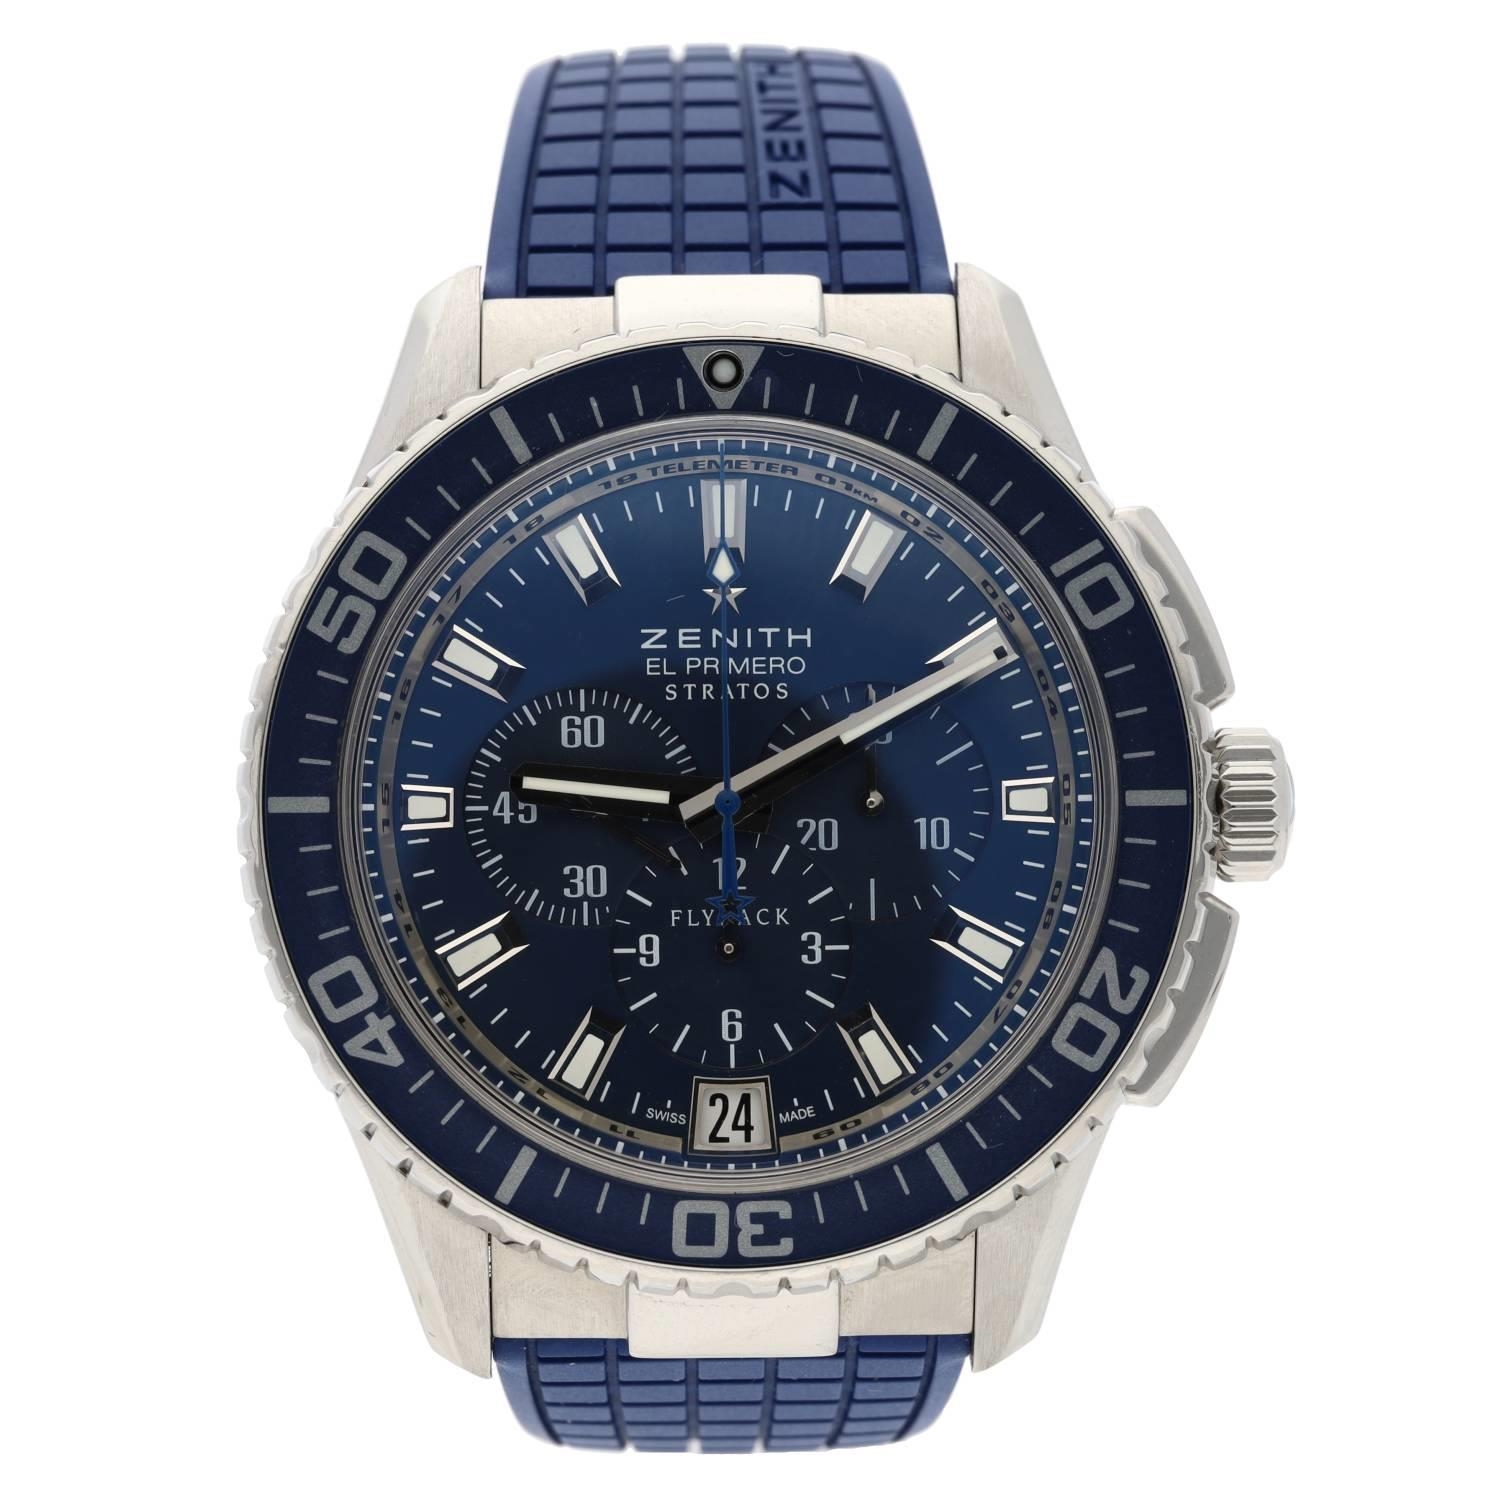 Fine Zenith El Primero Stratos Flyback automatic chronograph stainless steel gentleman's wristwatch, - Image 2 of 4